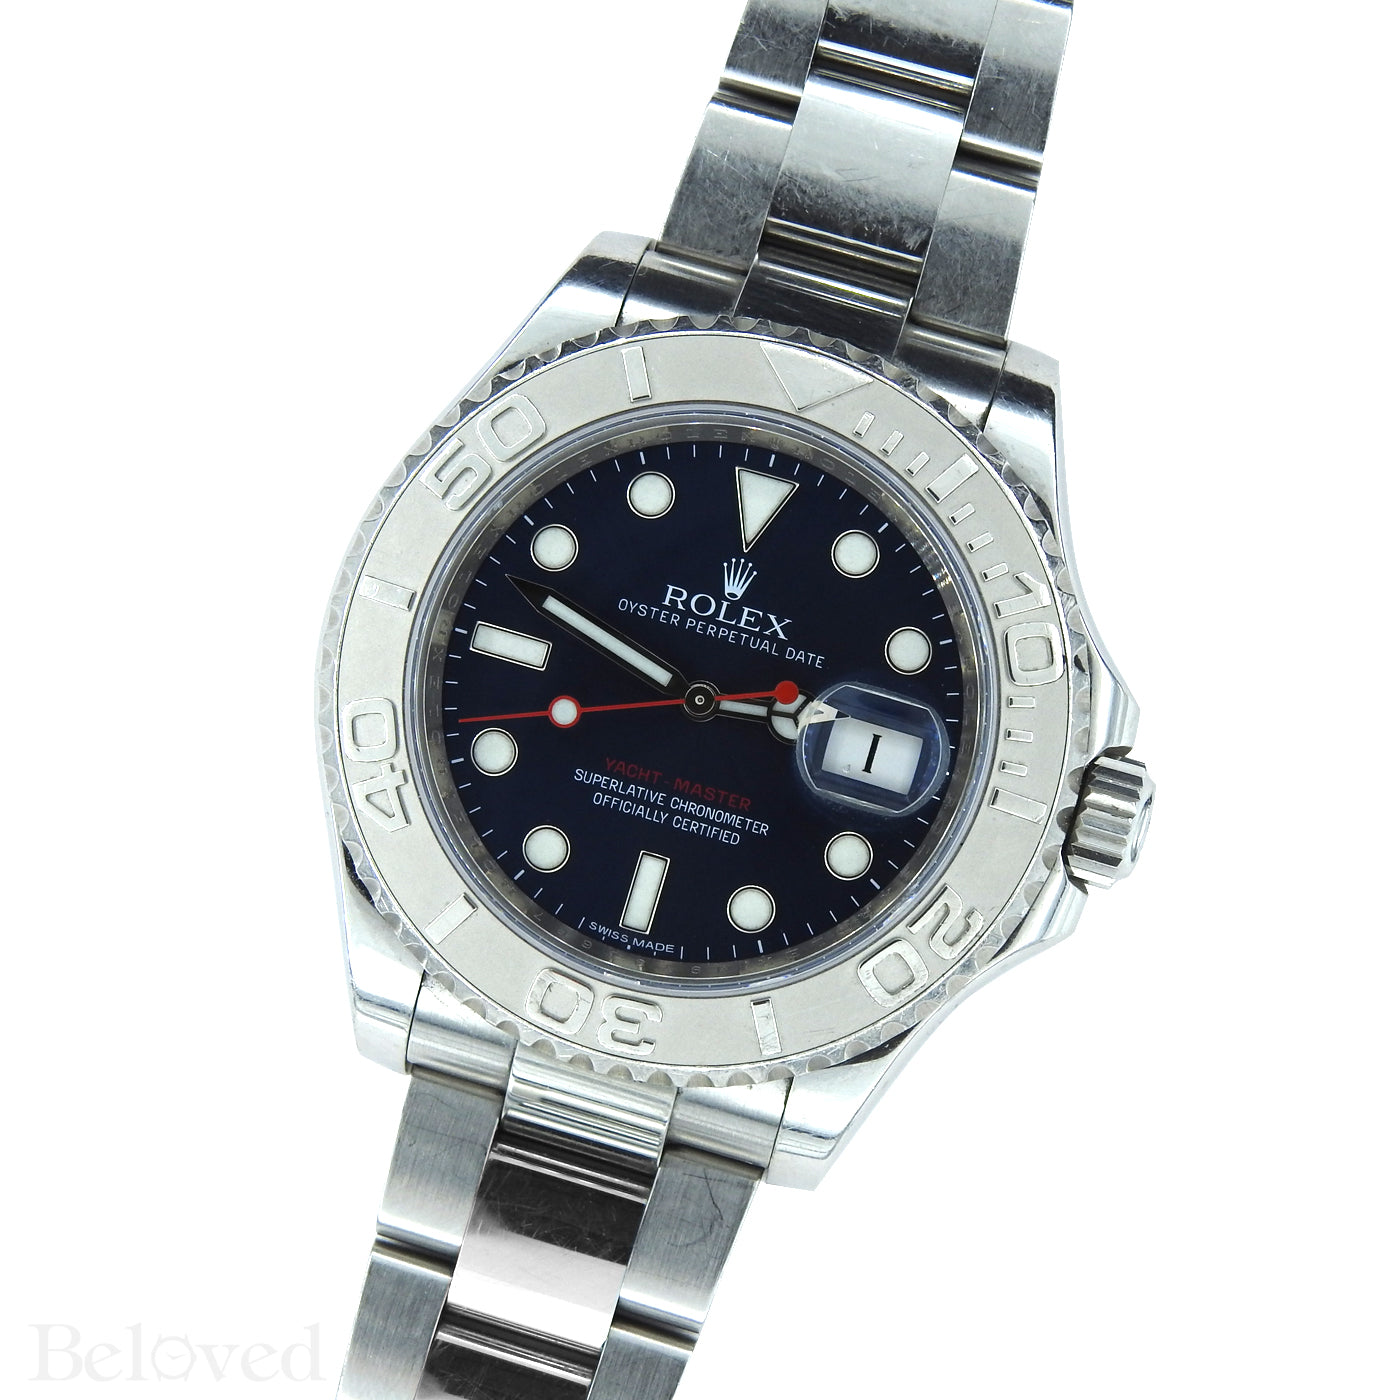 Rolex Yacht-Master 116622 Blue Dial Complete with Warranty Card & Rolex Box Image 3